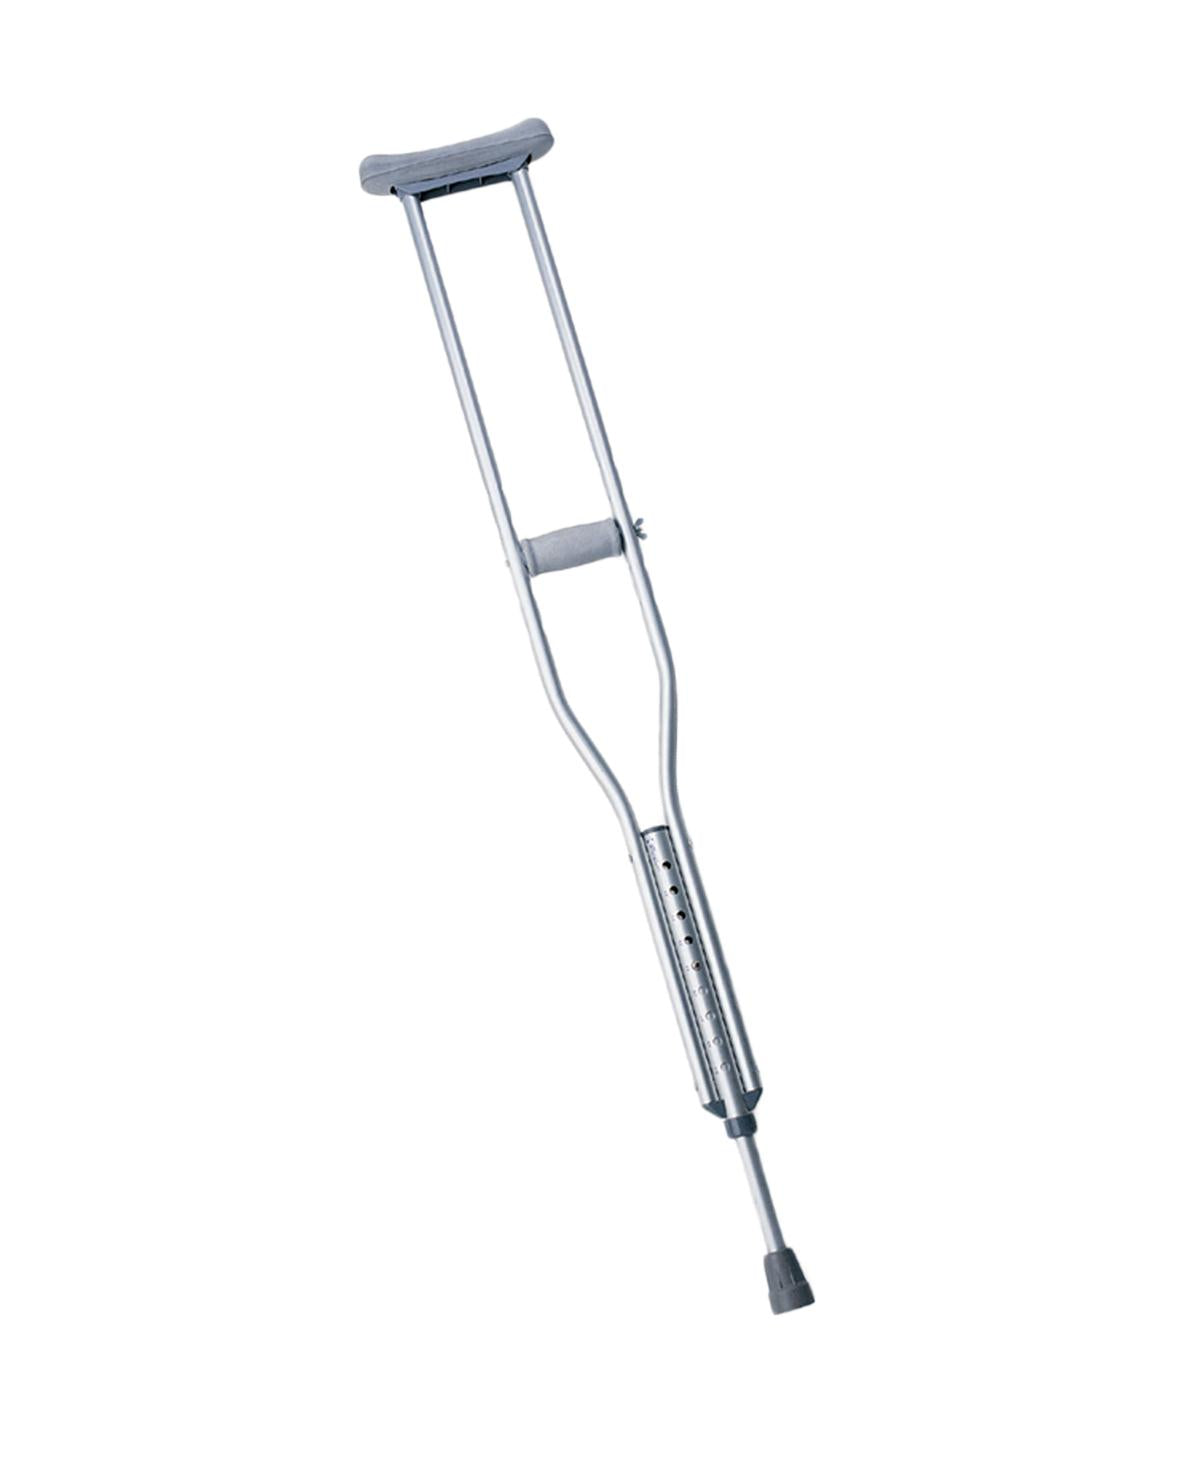 MDL MDSV80534 PAIR/1 CRUTCHES, TALL ADULT, 52IN TO 60 IN